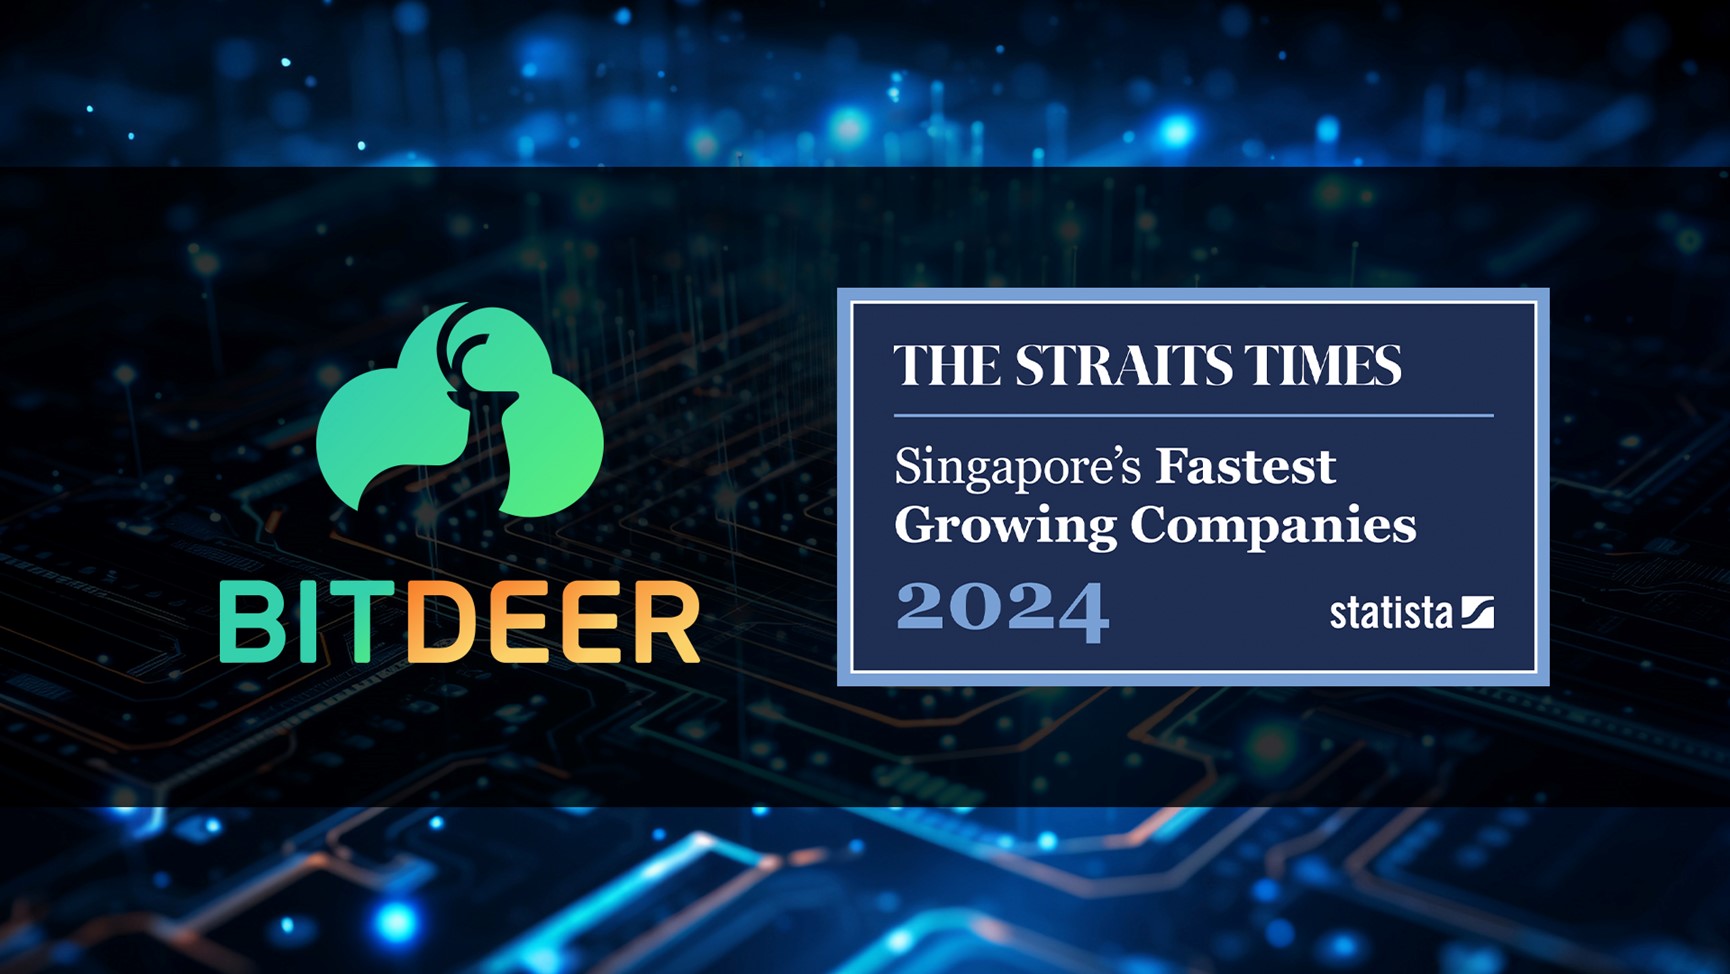 Bitdeer Named One of Singapore’s Fastest Growing Companies 2024 by The Straits Times and Statista